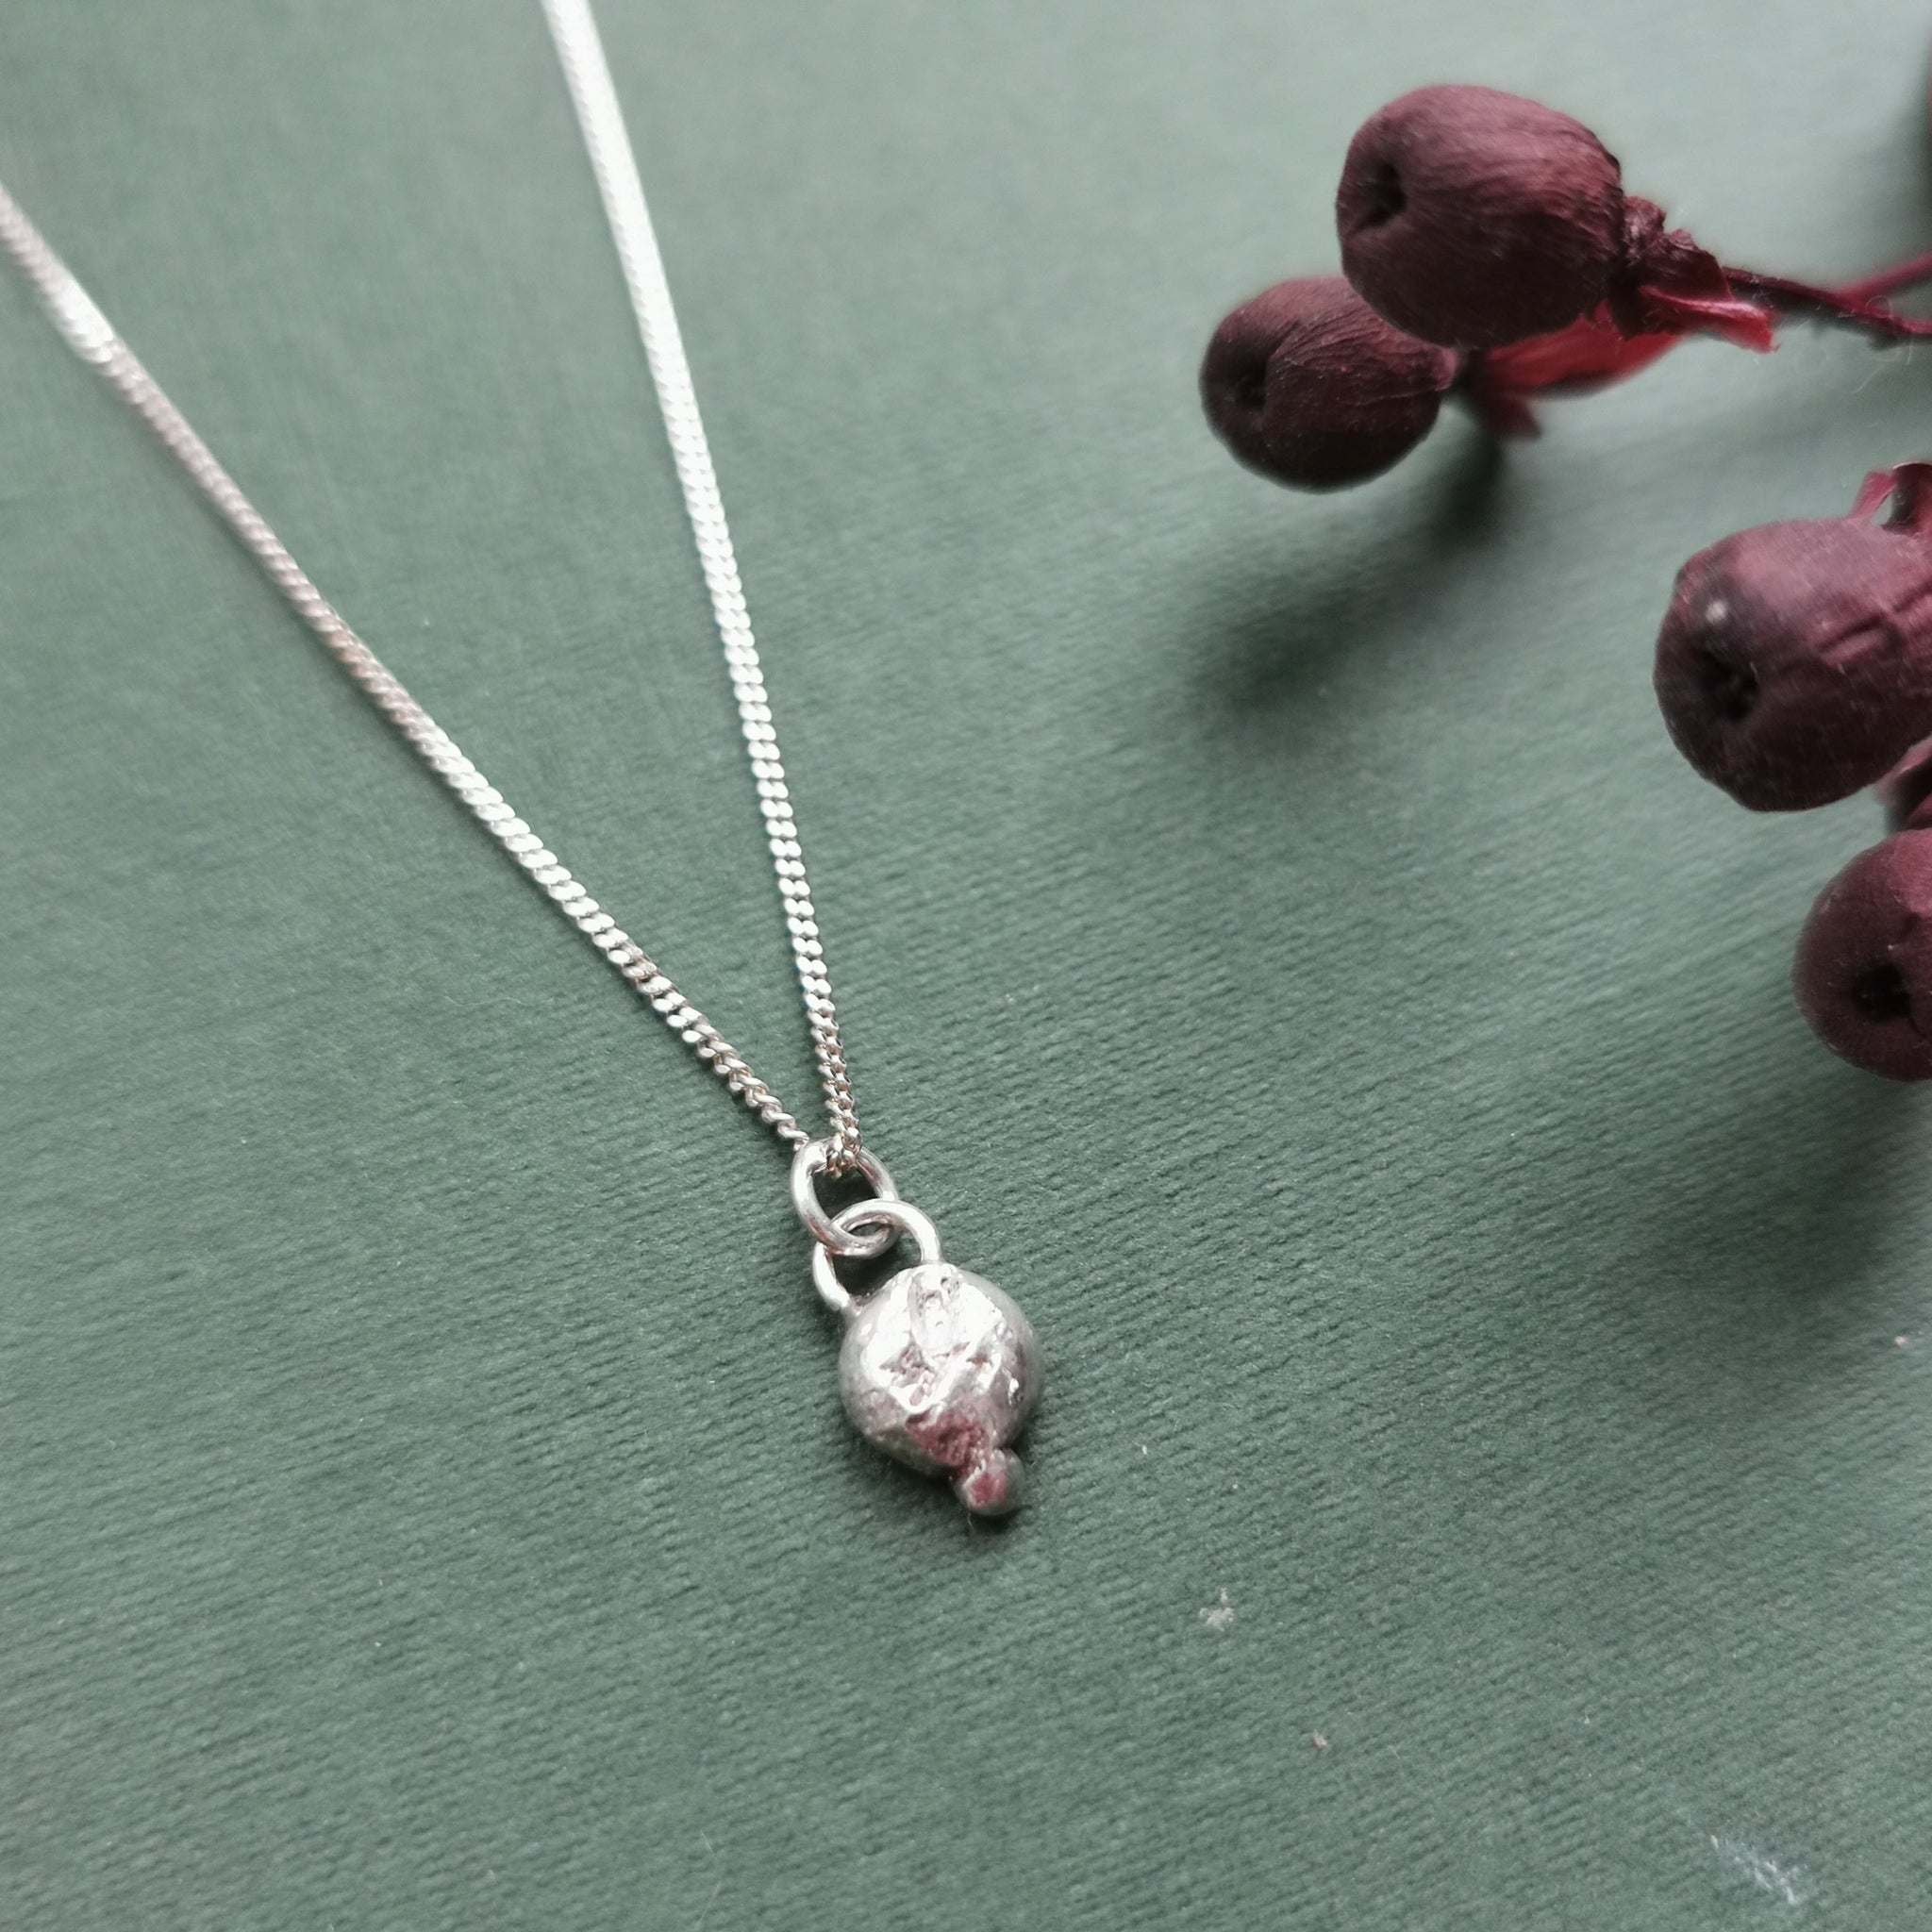 Tiny Organic Nugget Necklace